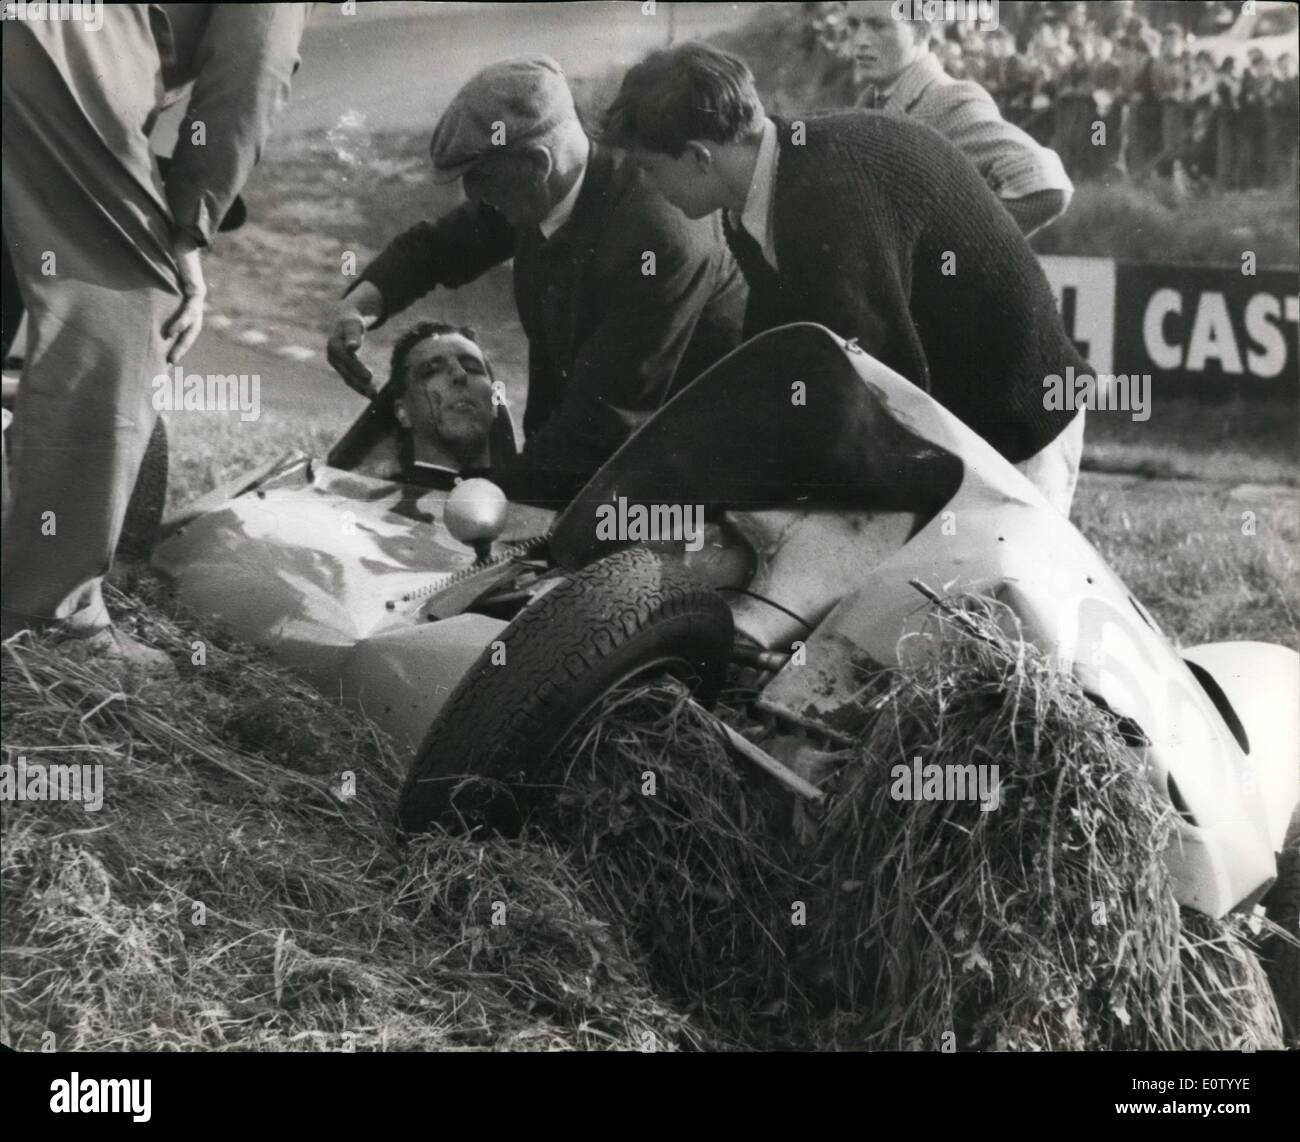 Oct. 10, 1960 - Racing driver's steering wheel game off; Racing driver, Dennis Taylor was driving his Lols racing car into Draid's Corner at 70 miles an hour when the steering wheel came away in his hand. He braked herd at the bottom of ''flat-out'' Davids Hill, during the last meeting of the season at Brand's Hatch, yesterday, and swung into the band. Above the roar of his engine, spectators heard the snap as the leather bound wheel sheared from its mounting. Man and women ran for the lives as the car plounged into a bank Stock Photo